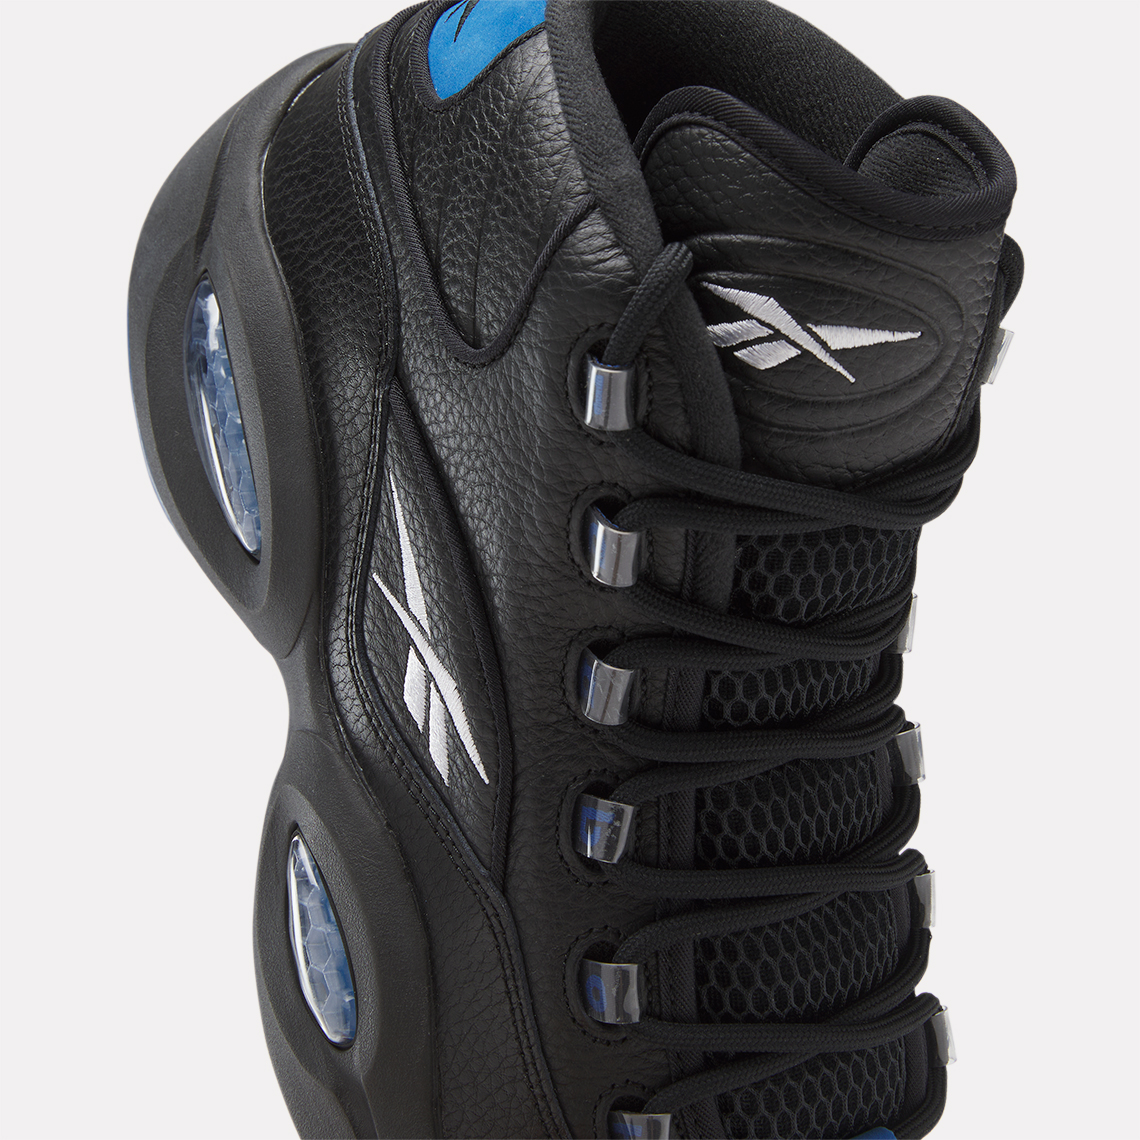 Reebok Question Mid Black And Blue Rb0057 7